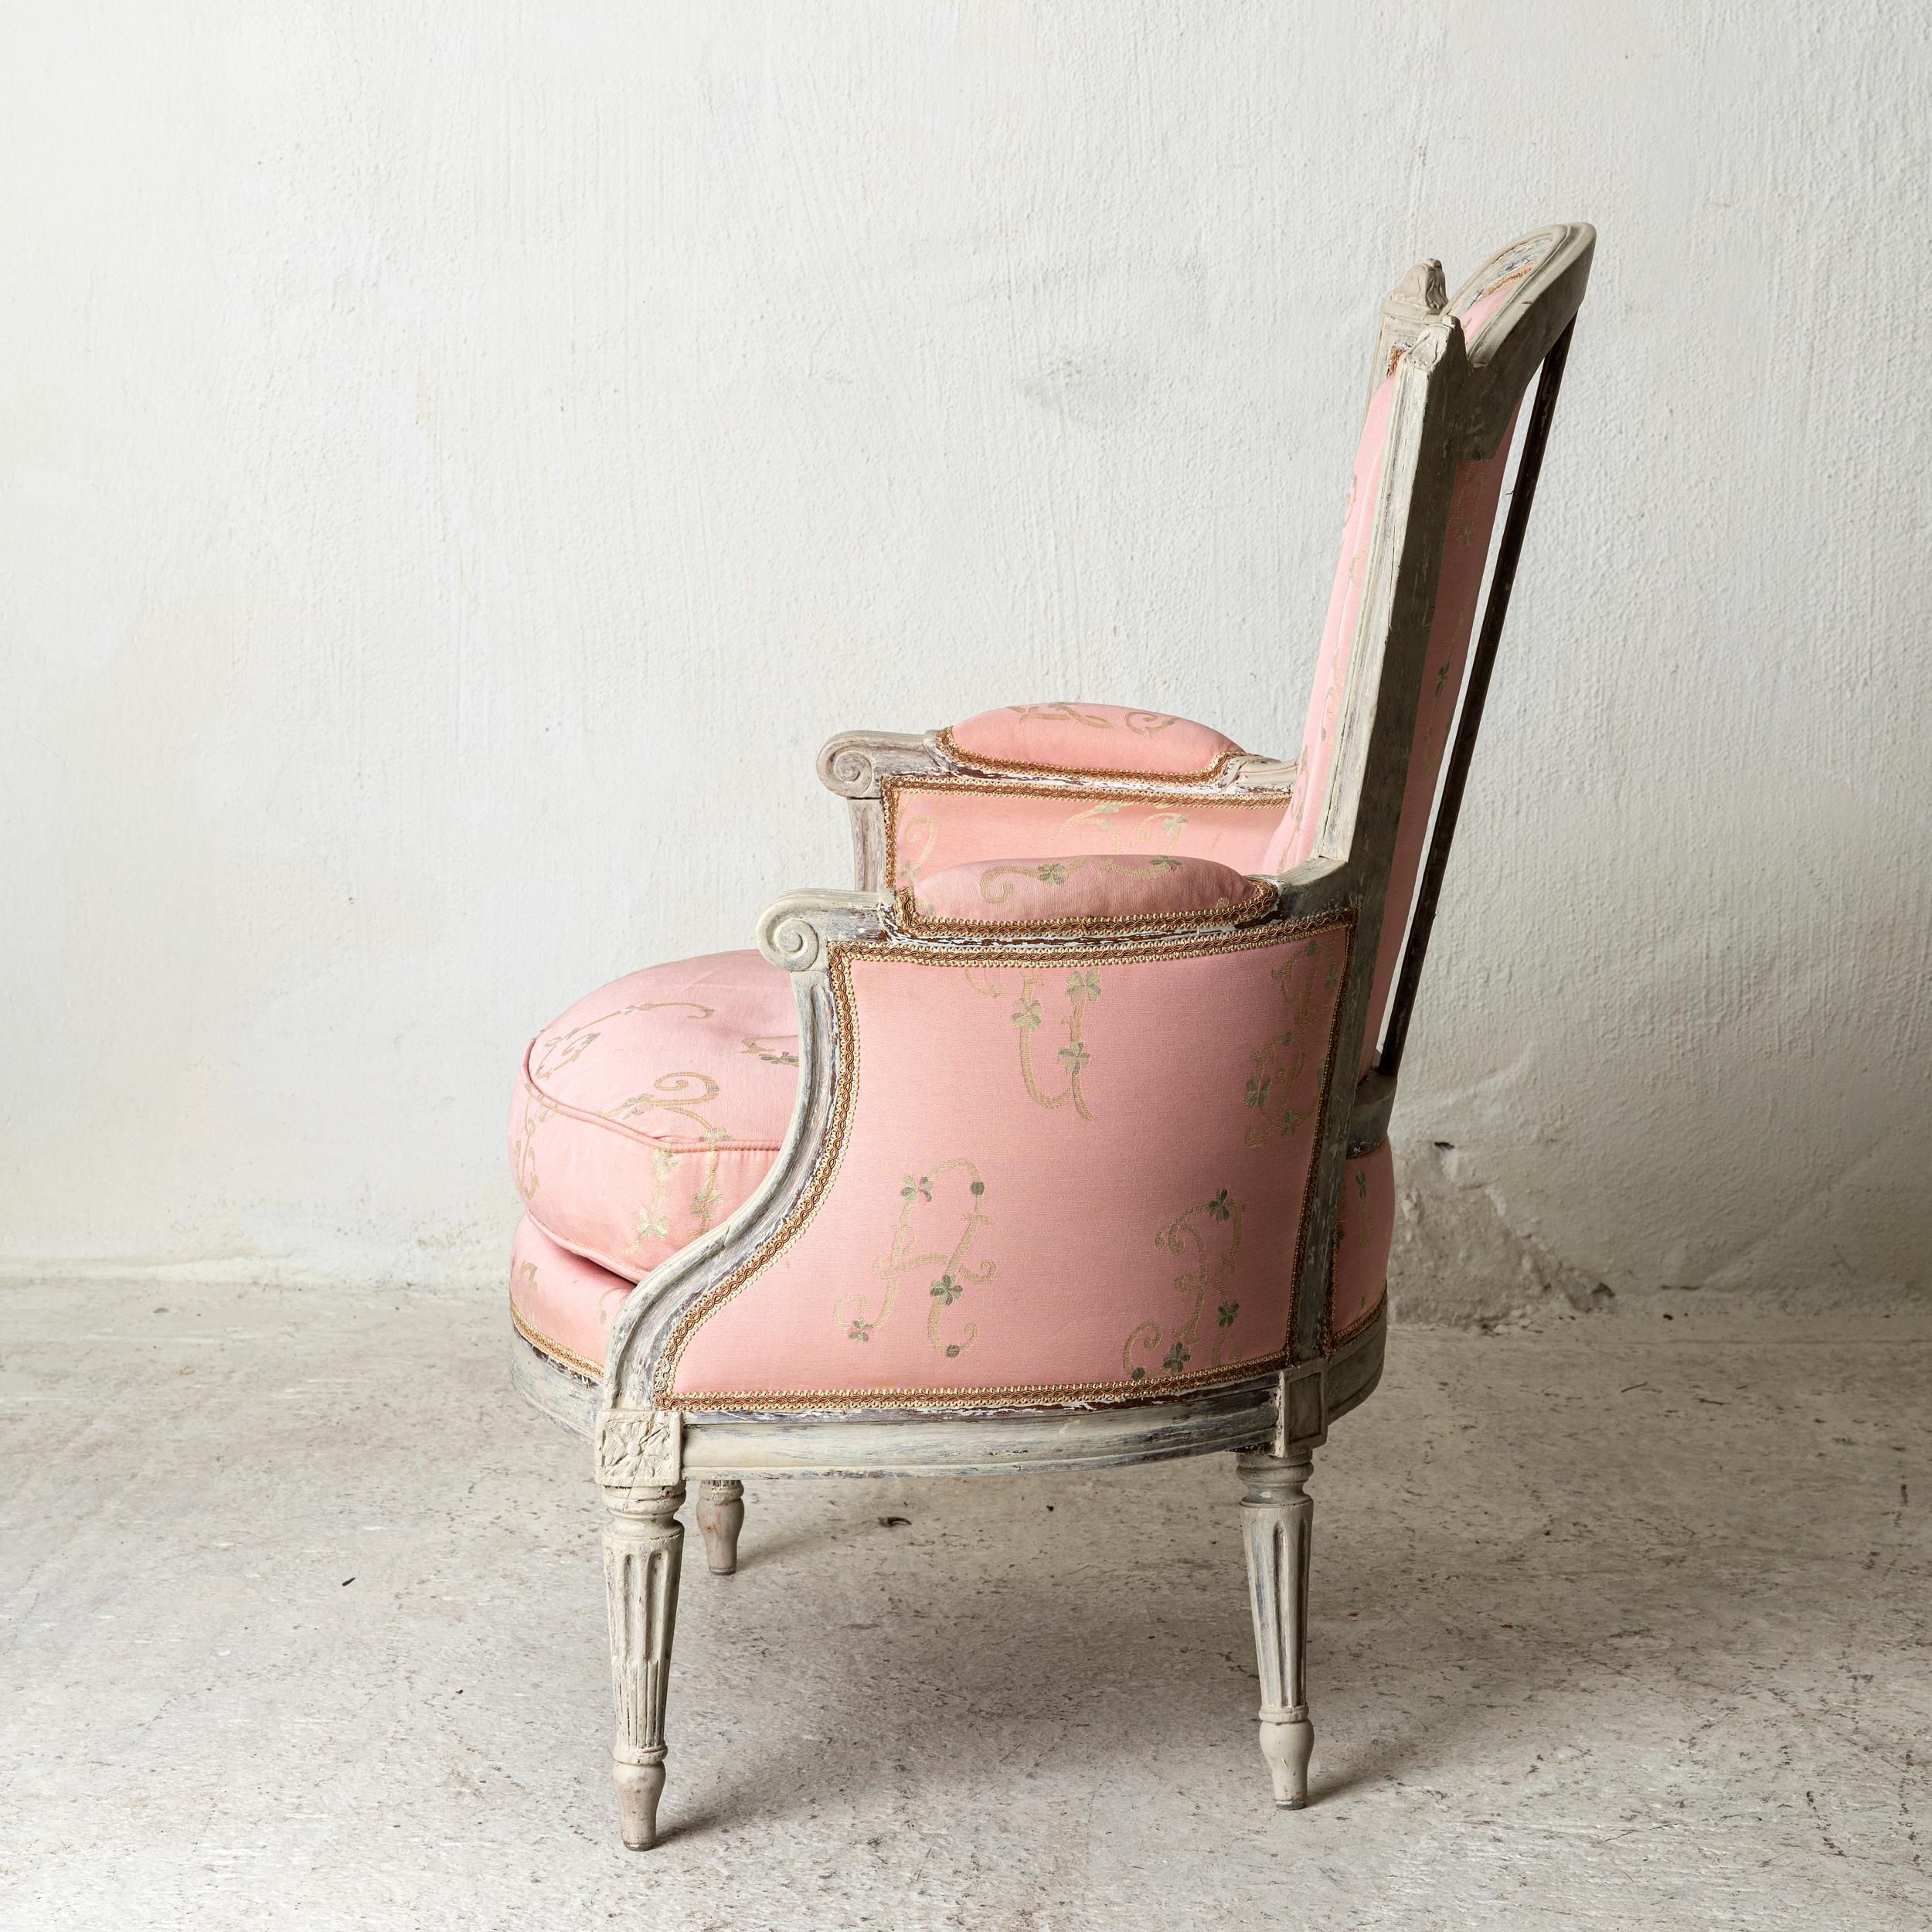 Chair bergère Louis XVI neoclassical French white pink France. An armchair bergère made during the Louis XVI period in France. Painted in a white finish. Channeled legs and armrests. Beautiful carvings in back and frieze. Upholstered in a light pink